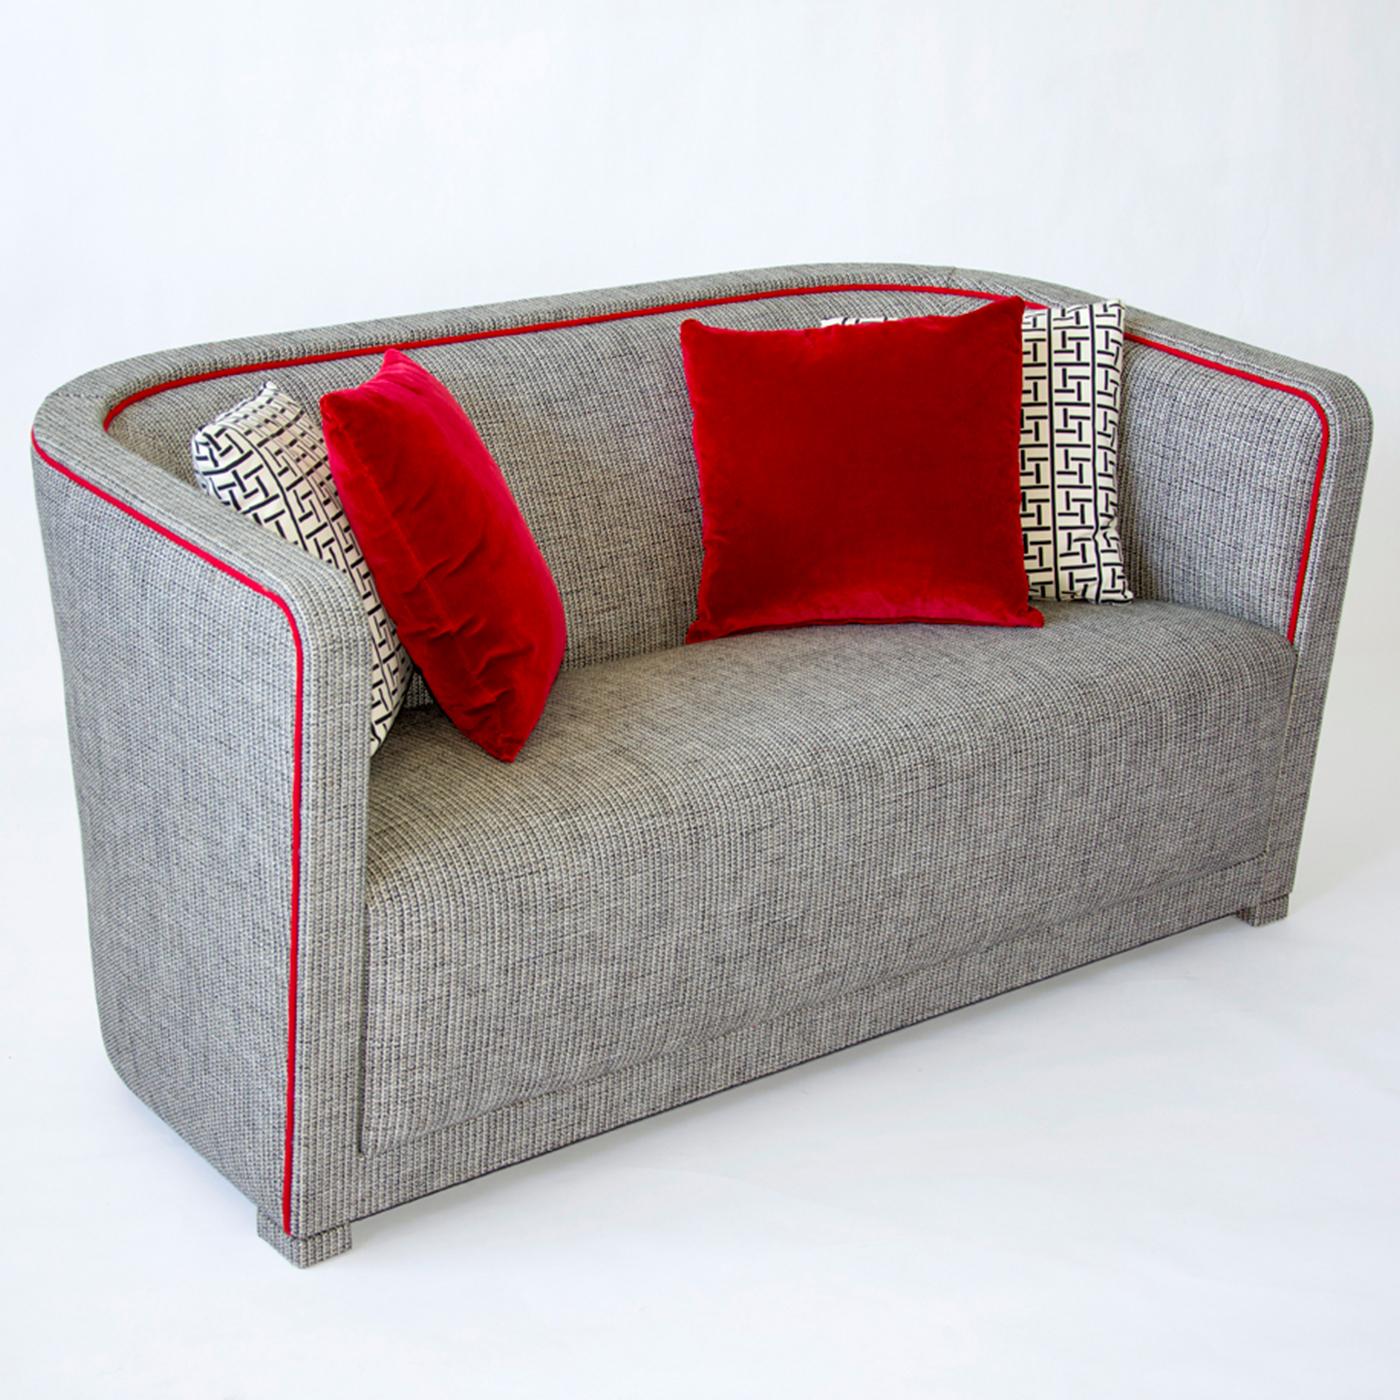 A cozy seat for two that is elegant and comfortable, this love seat can be displayed in a small entryway, a study or office, or in a bedroom. Elegant and modern, this piece is an ideal choice to add a welcoming accent to any interior. Its enclosing